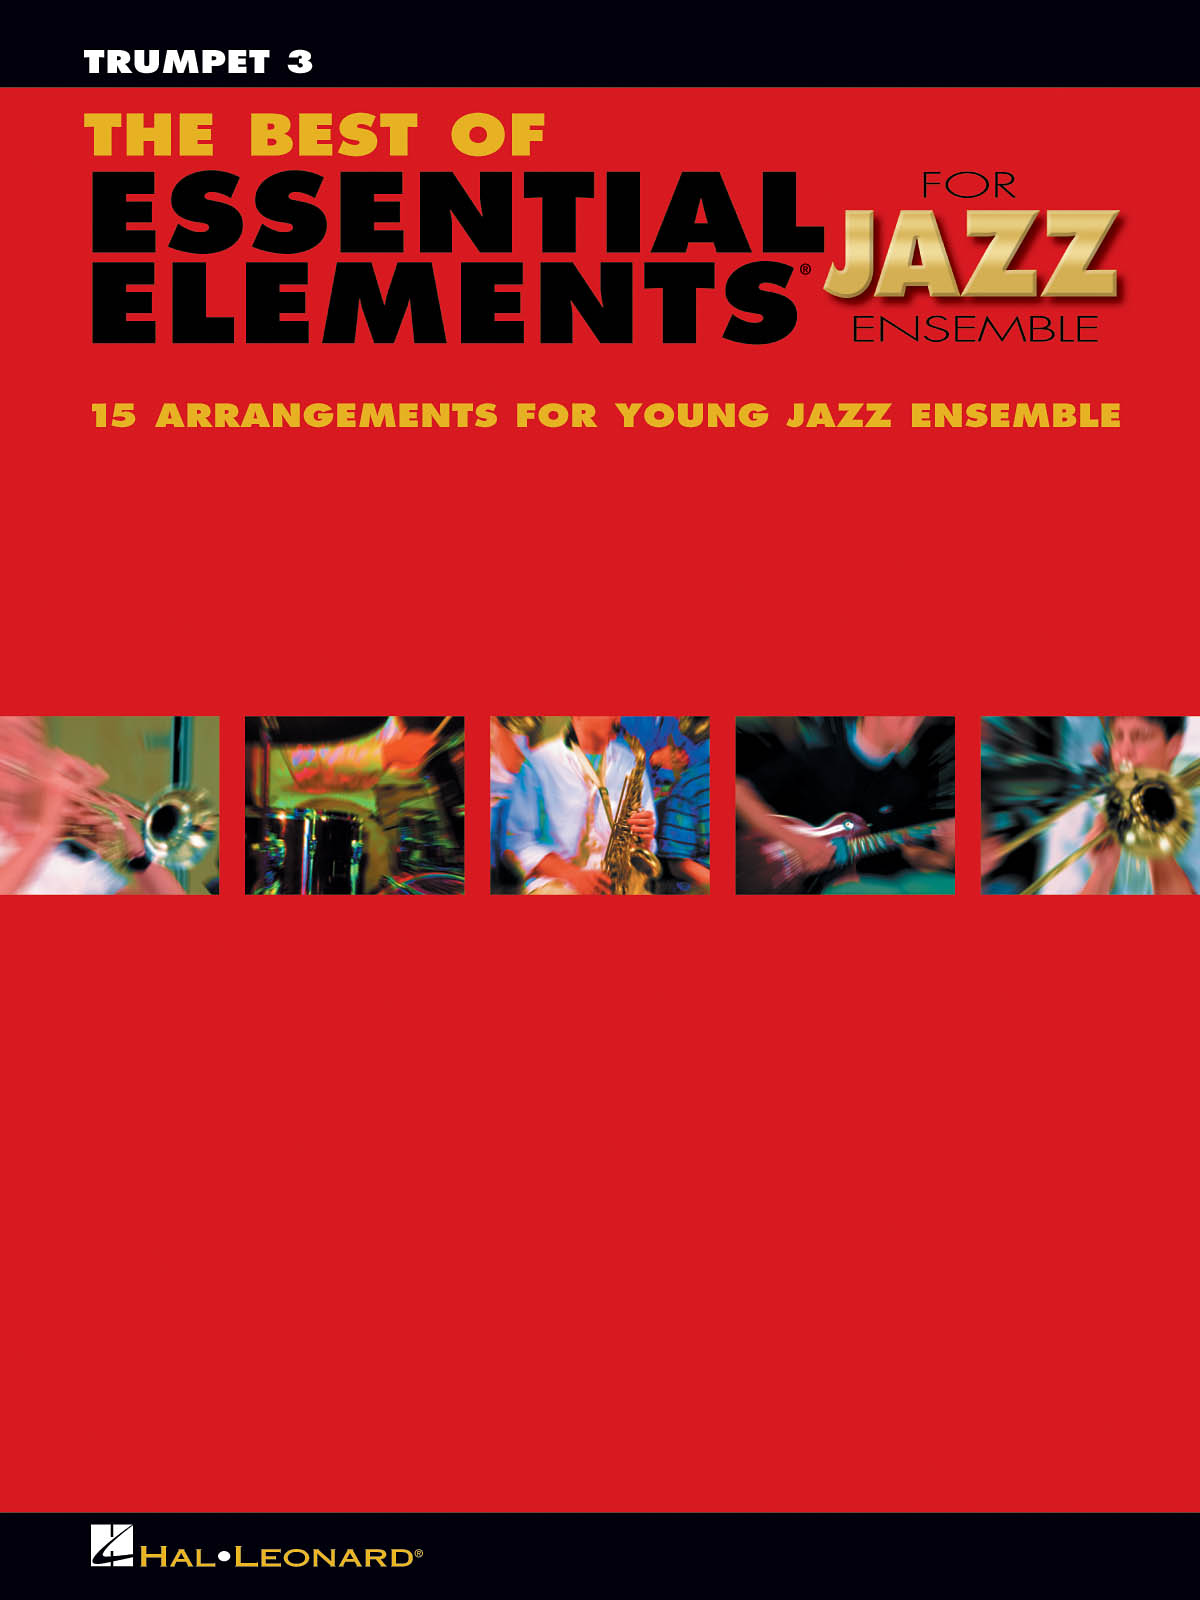 The Best of Essential Elements For Jazz Ensemble (Trompet 3)